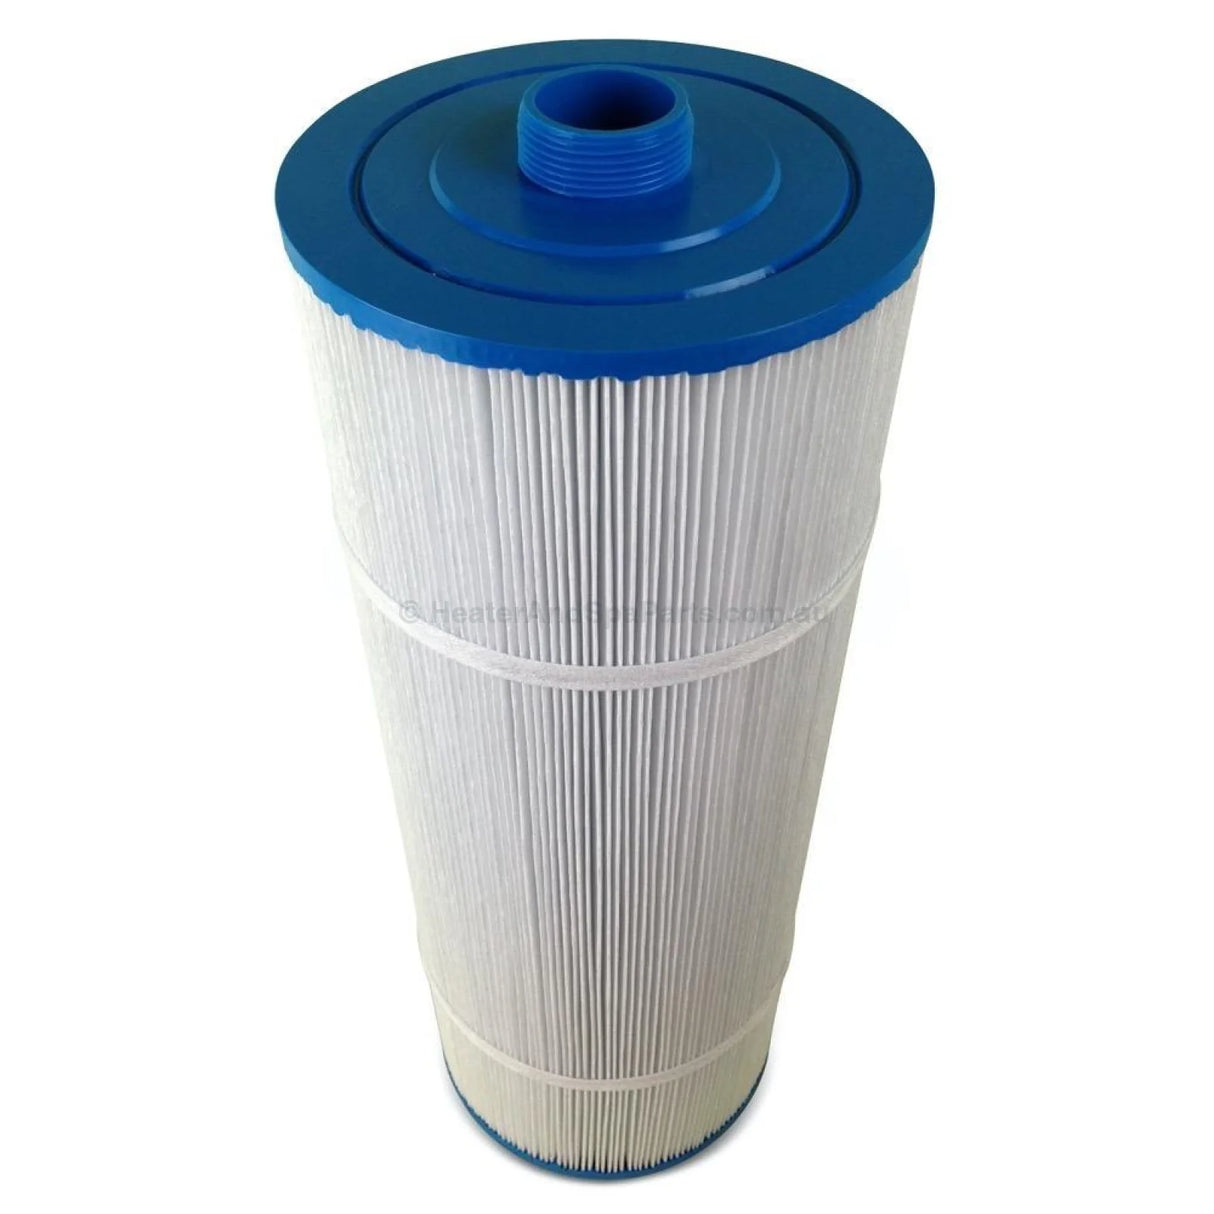 Sundance C90 - Replacement Cartridge Filter - Heater and Spa Parts